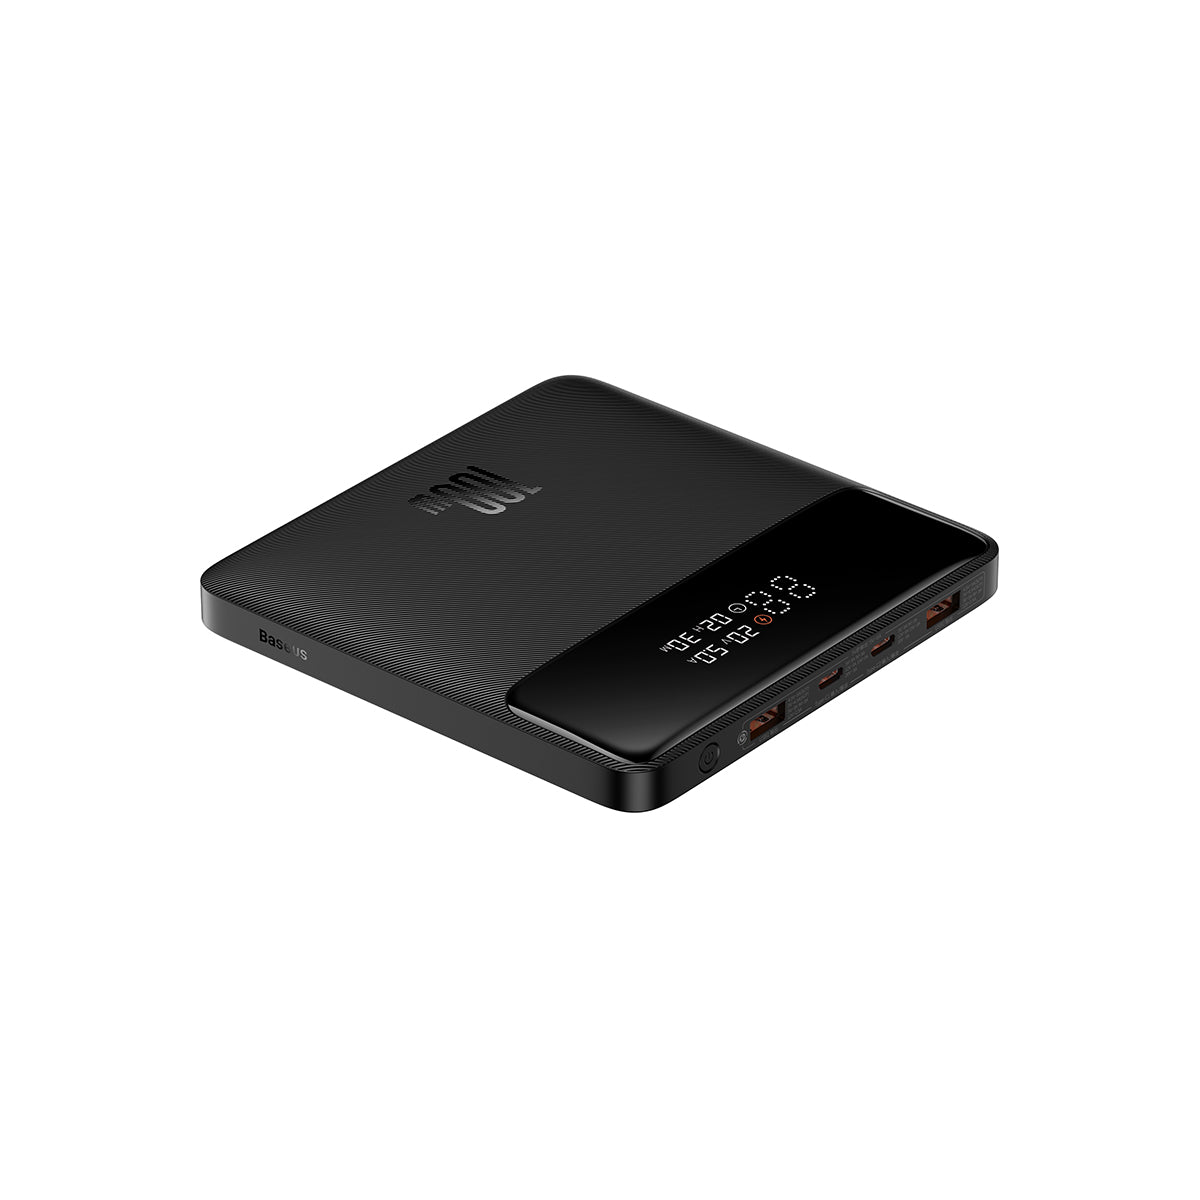 Baseus Blade 100W Power Bank, hands on: A versatile and portable charger  for multiple devices